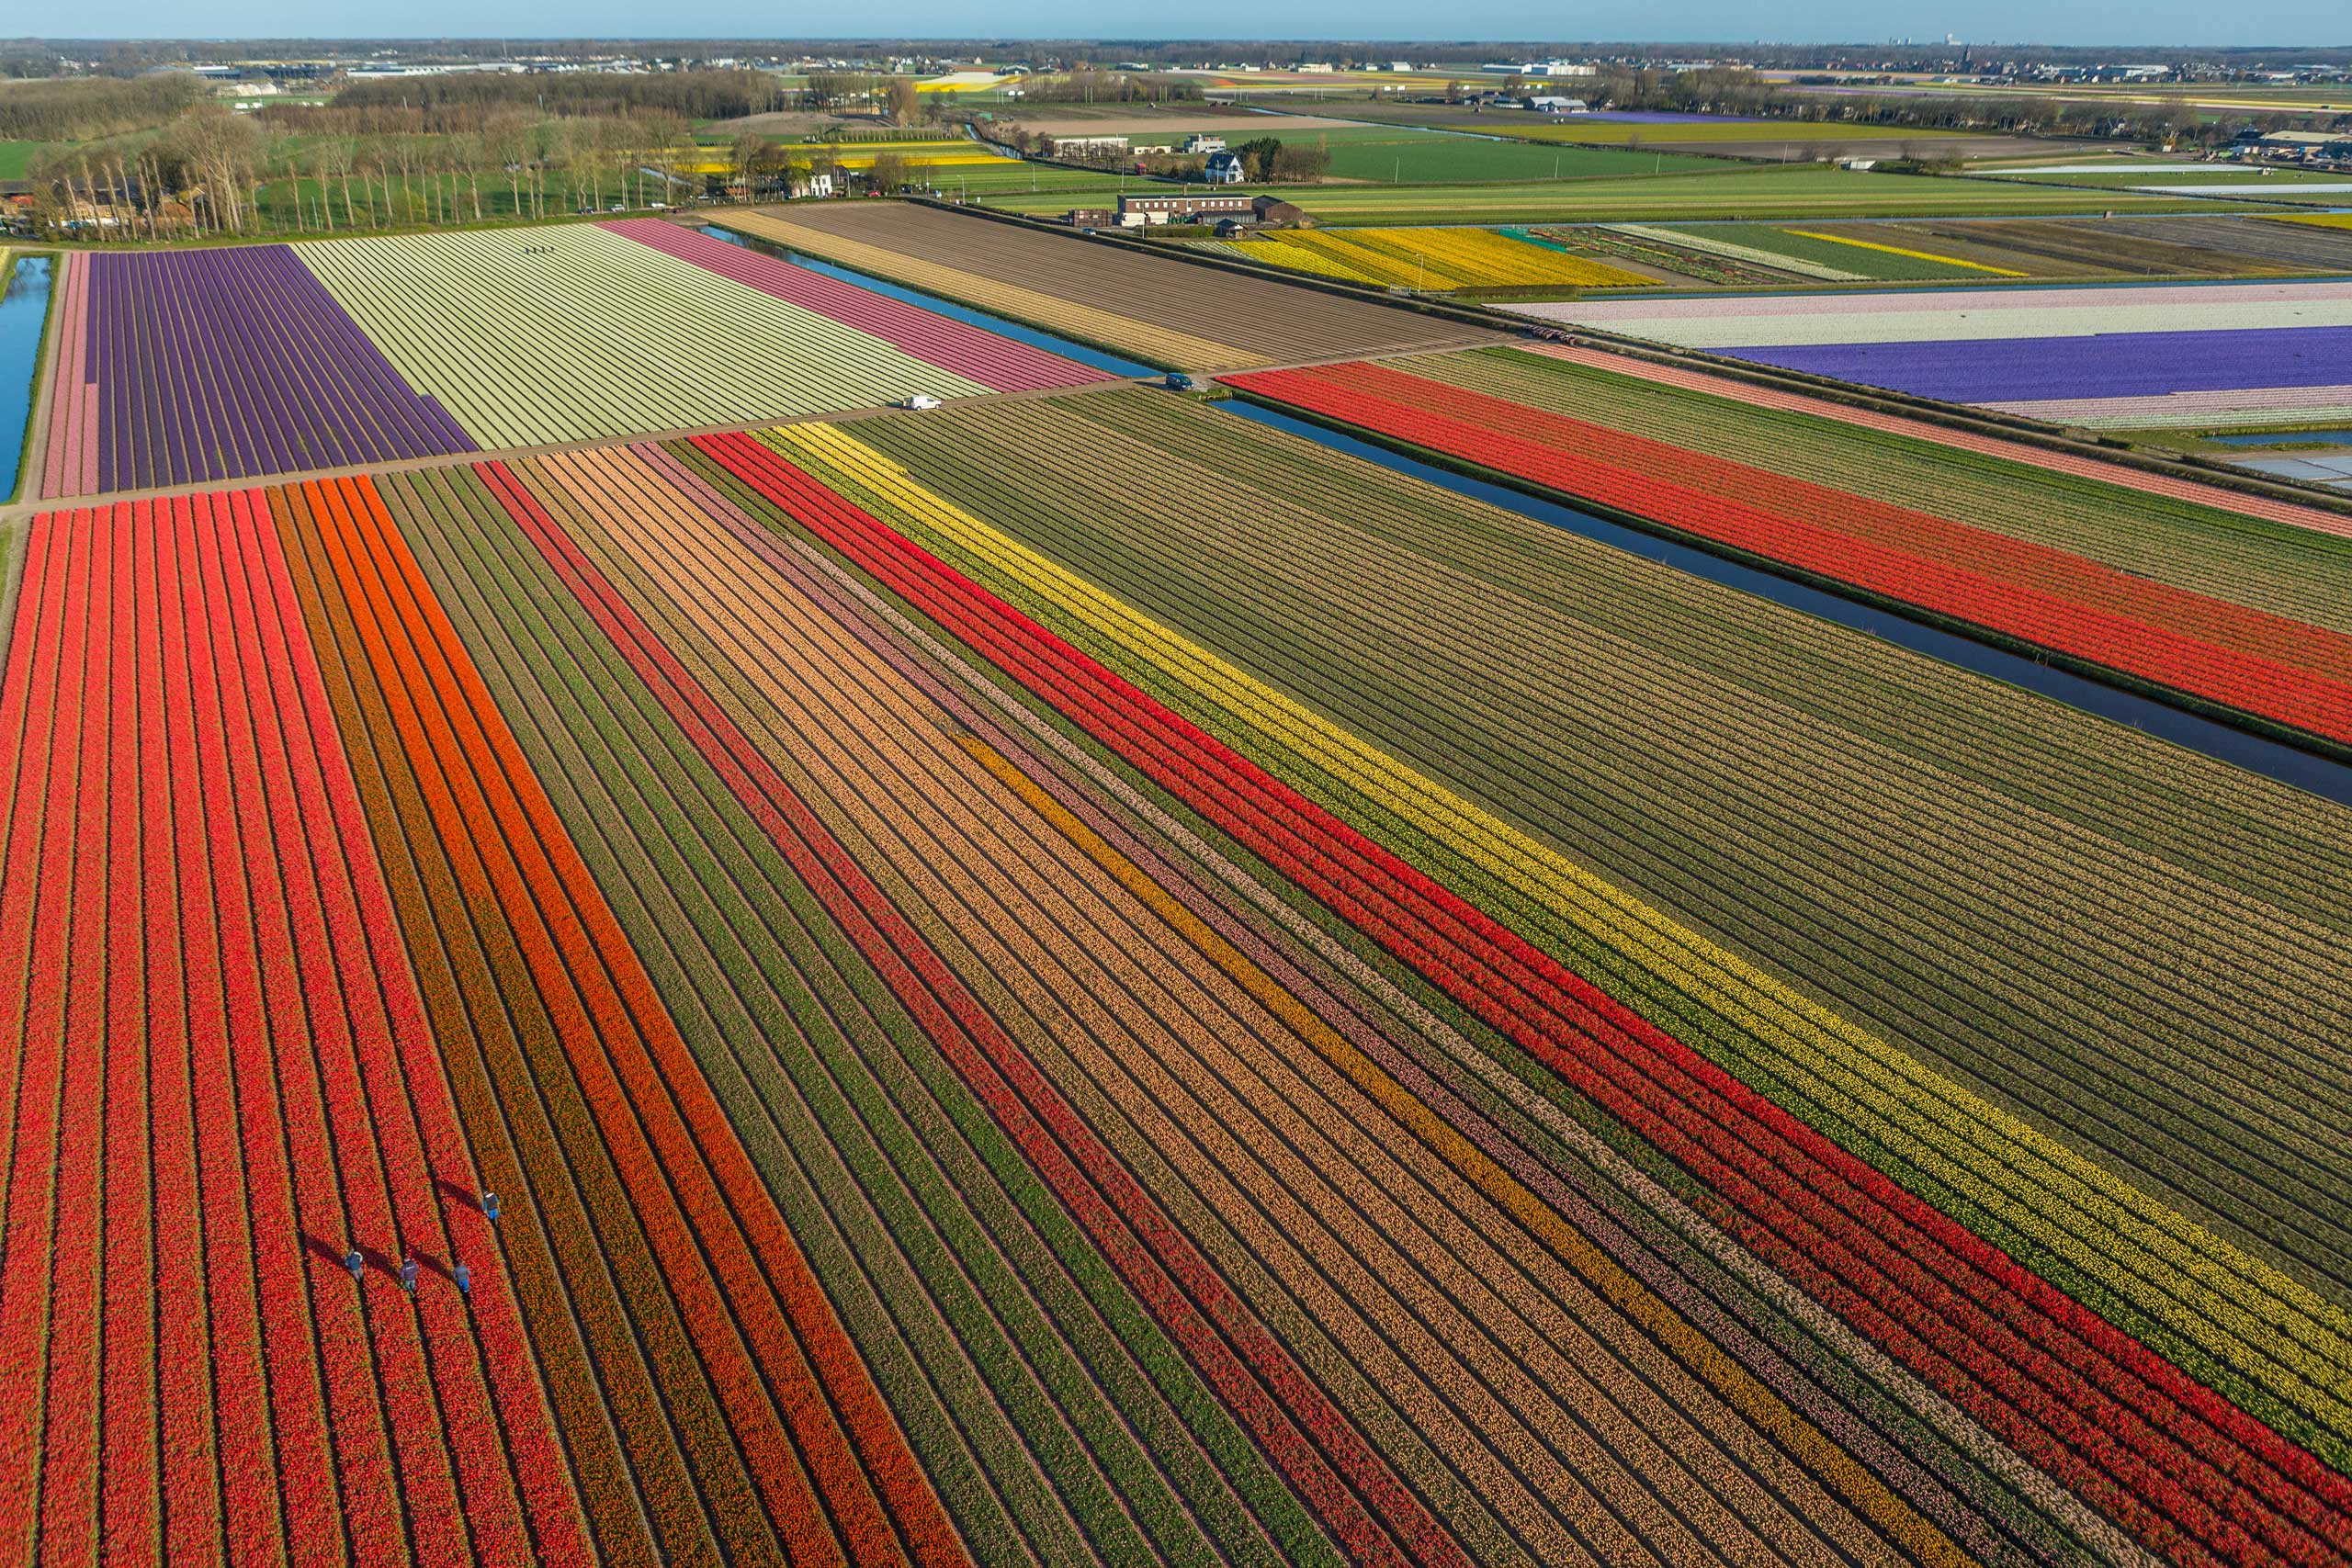 Tulips blooming in fields between Amsterdam and Leiden, The Netherlands.